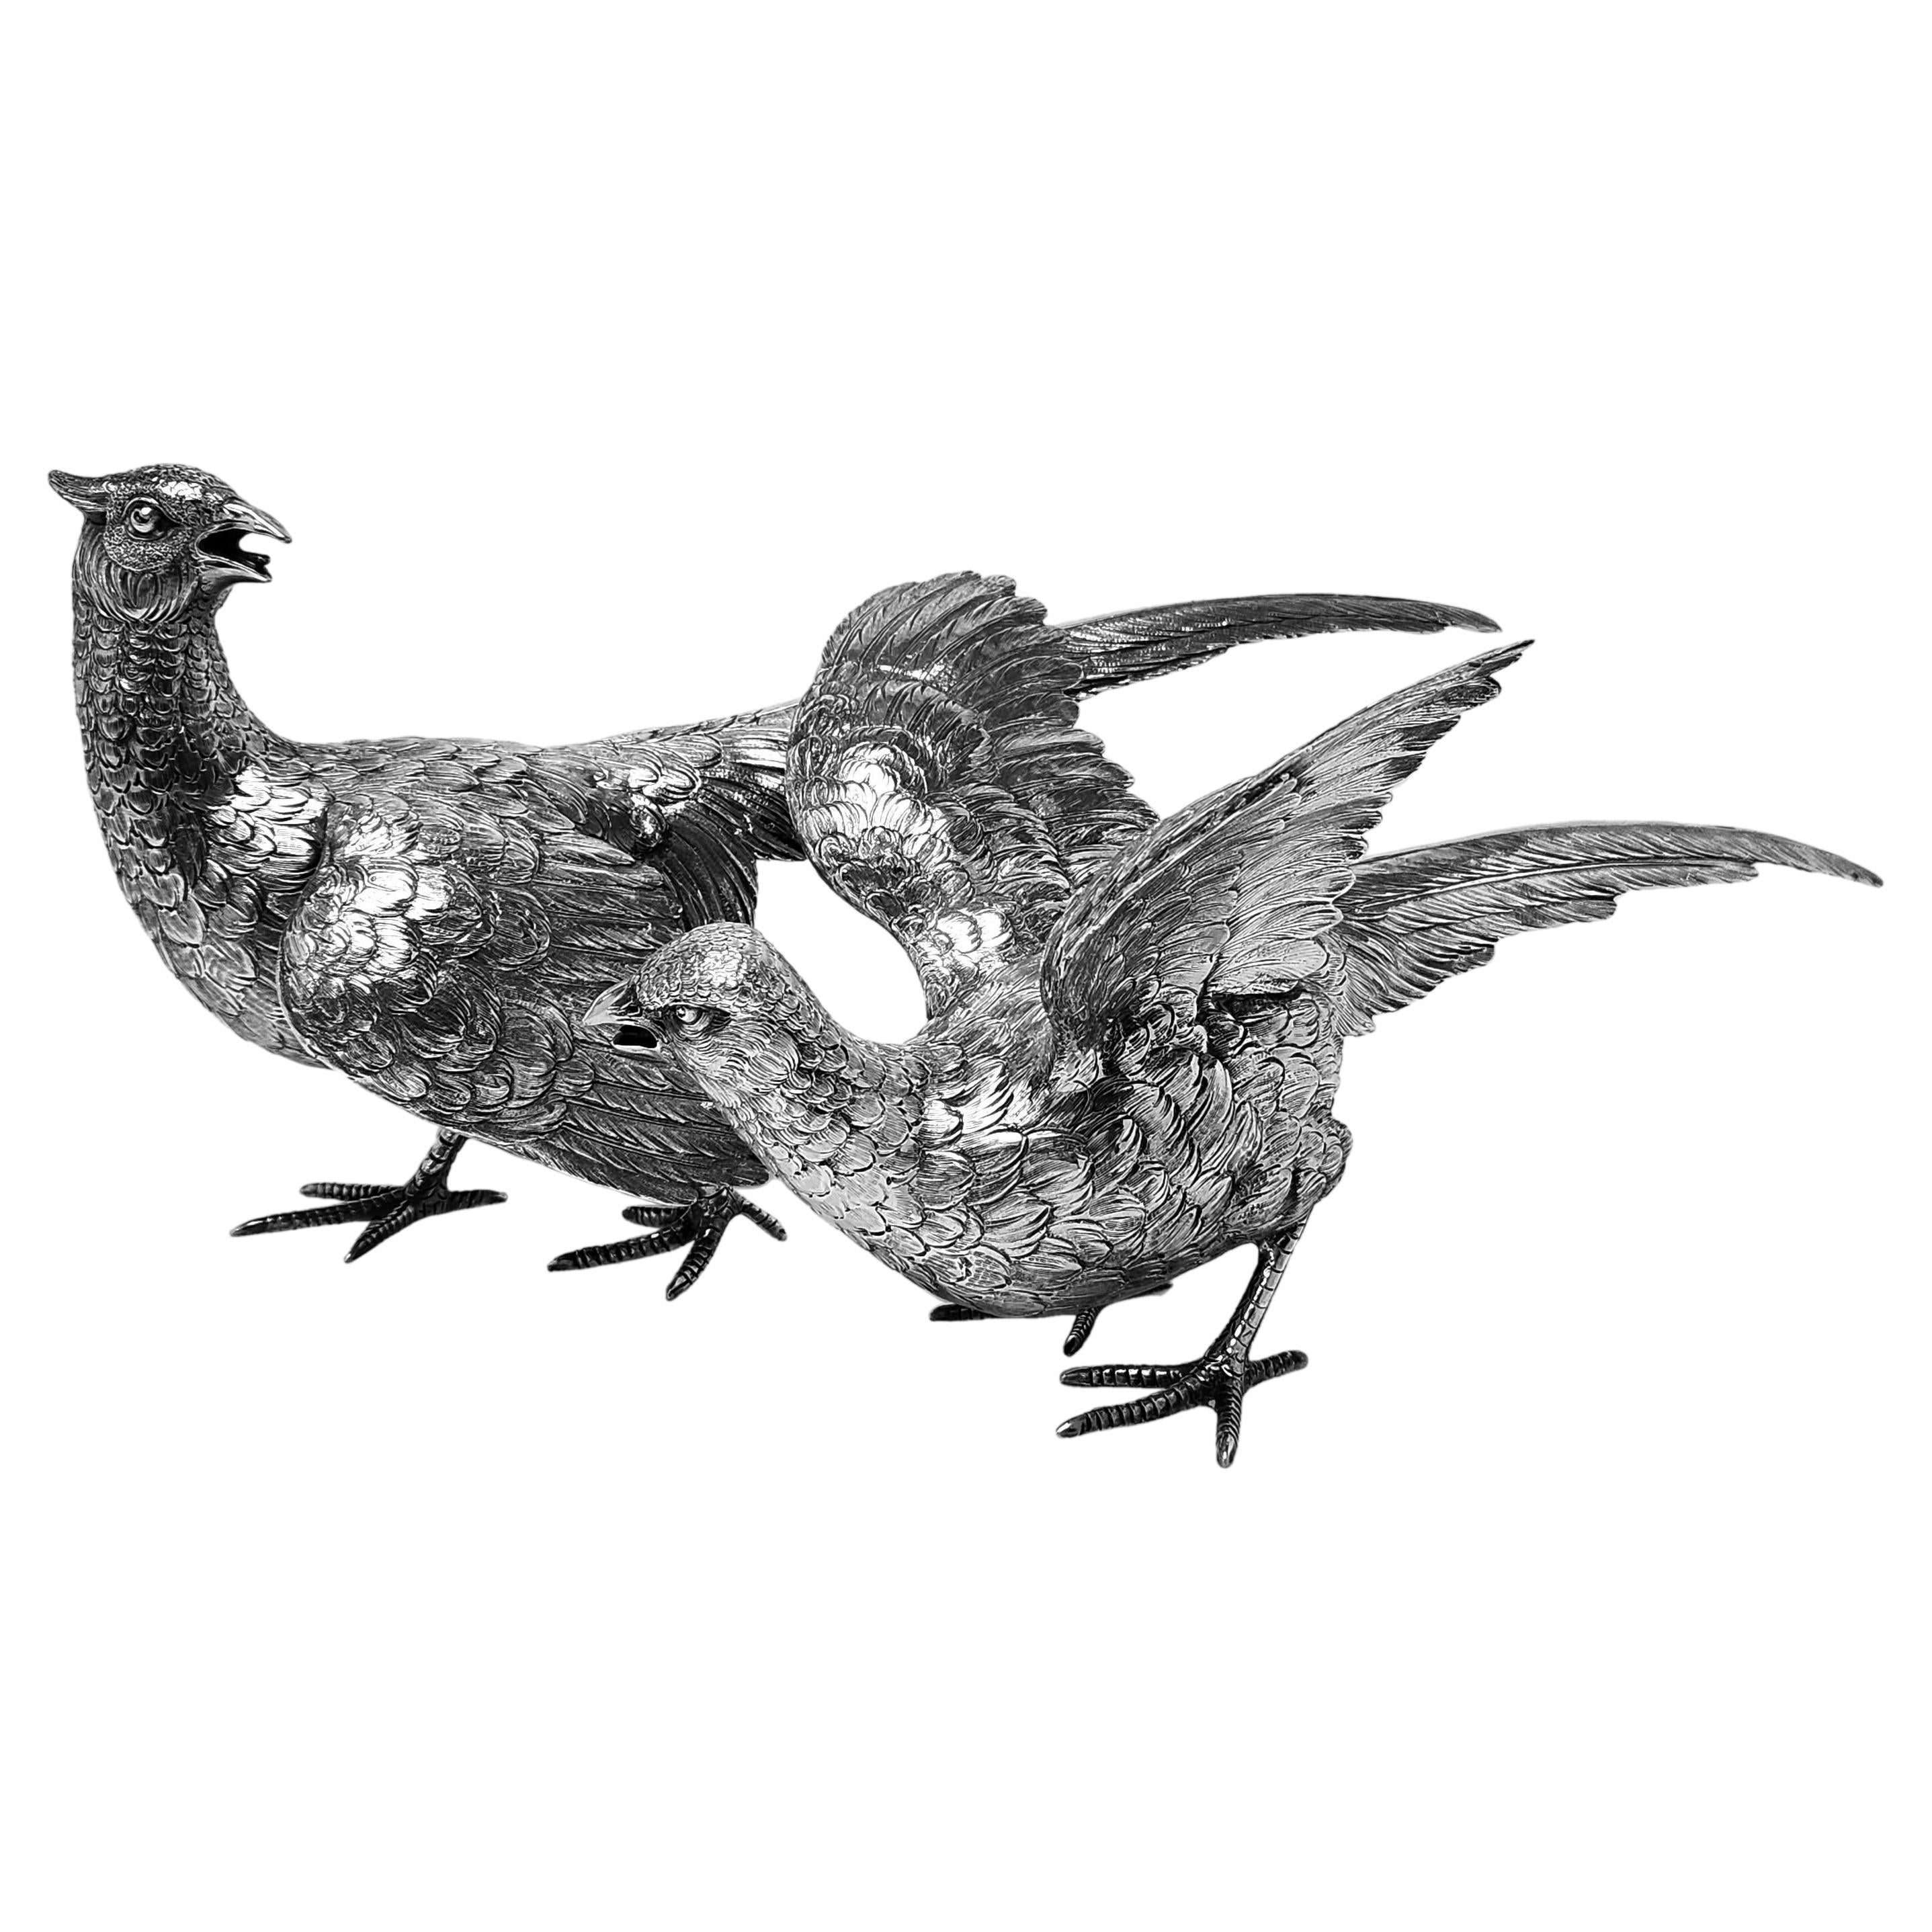 Pair Antique Silver Pheasants Model Birds Figurines Germany c. 1900 For Sale